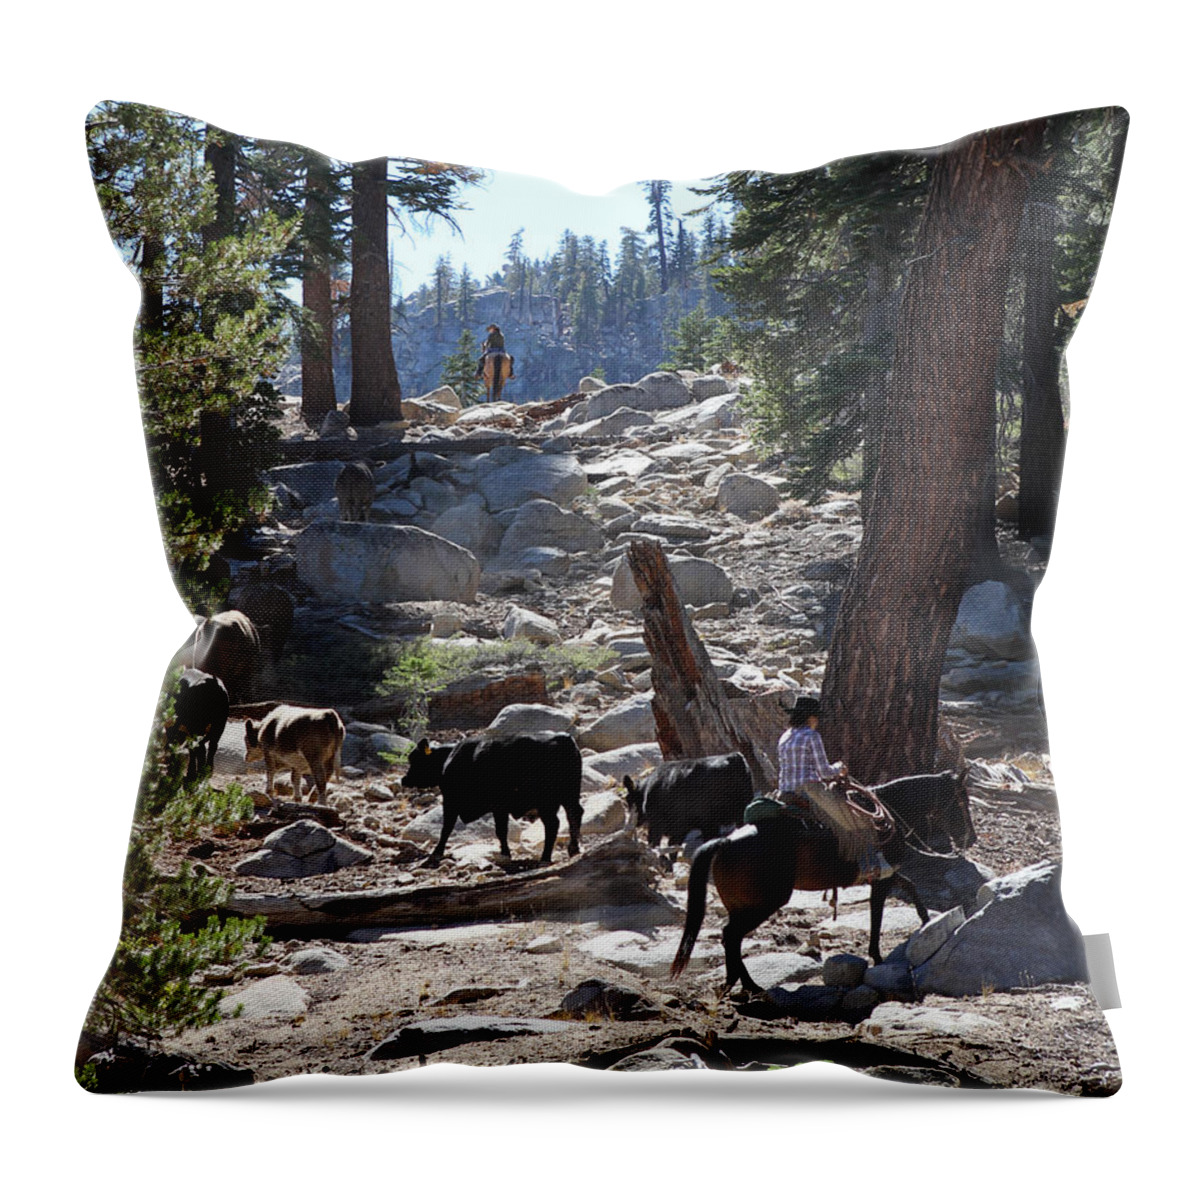 Cattle Throw Pillow featuring the photograph Cattle Climbing by Diane Bohna